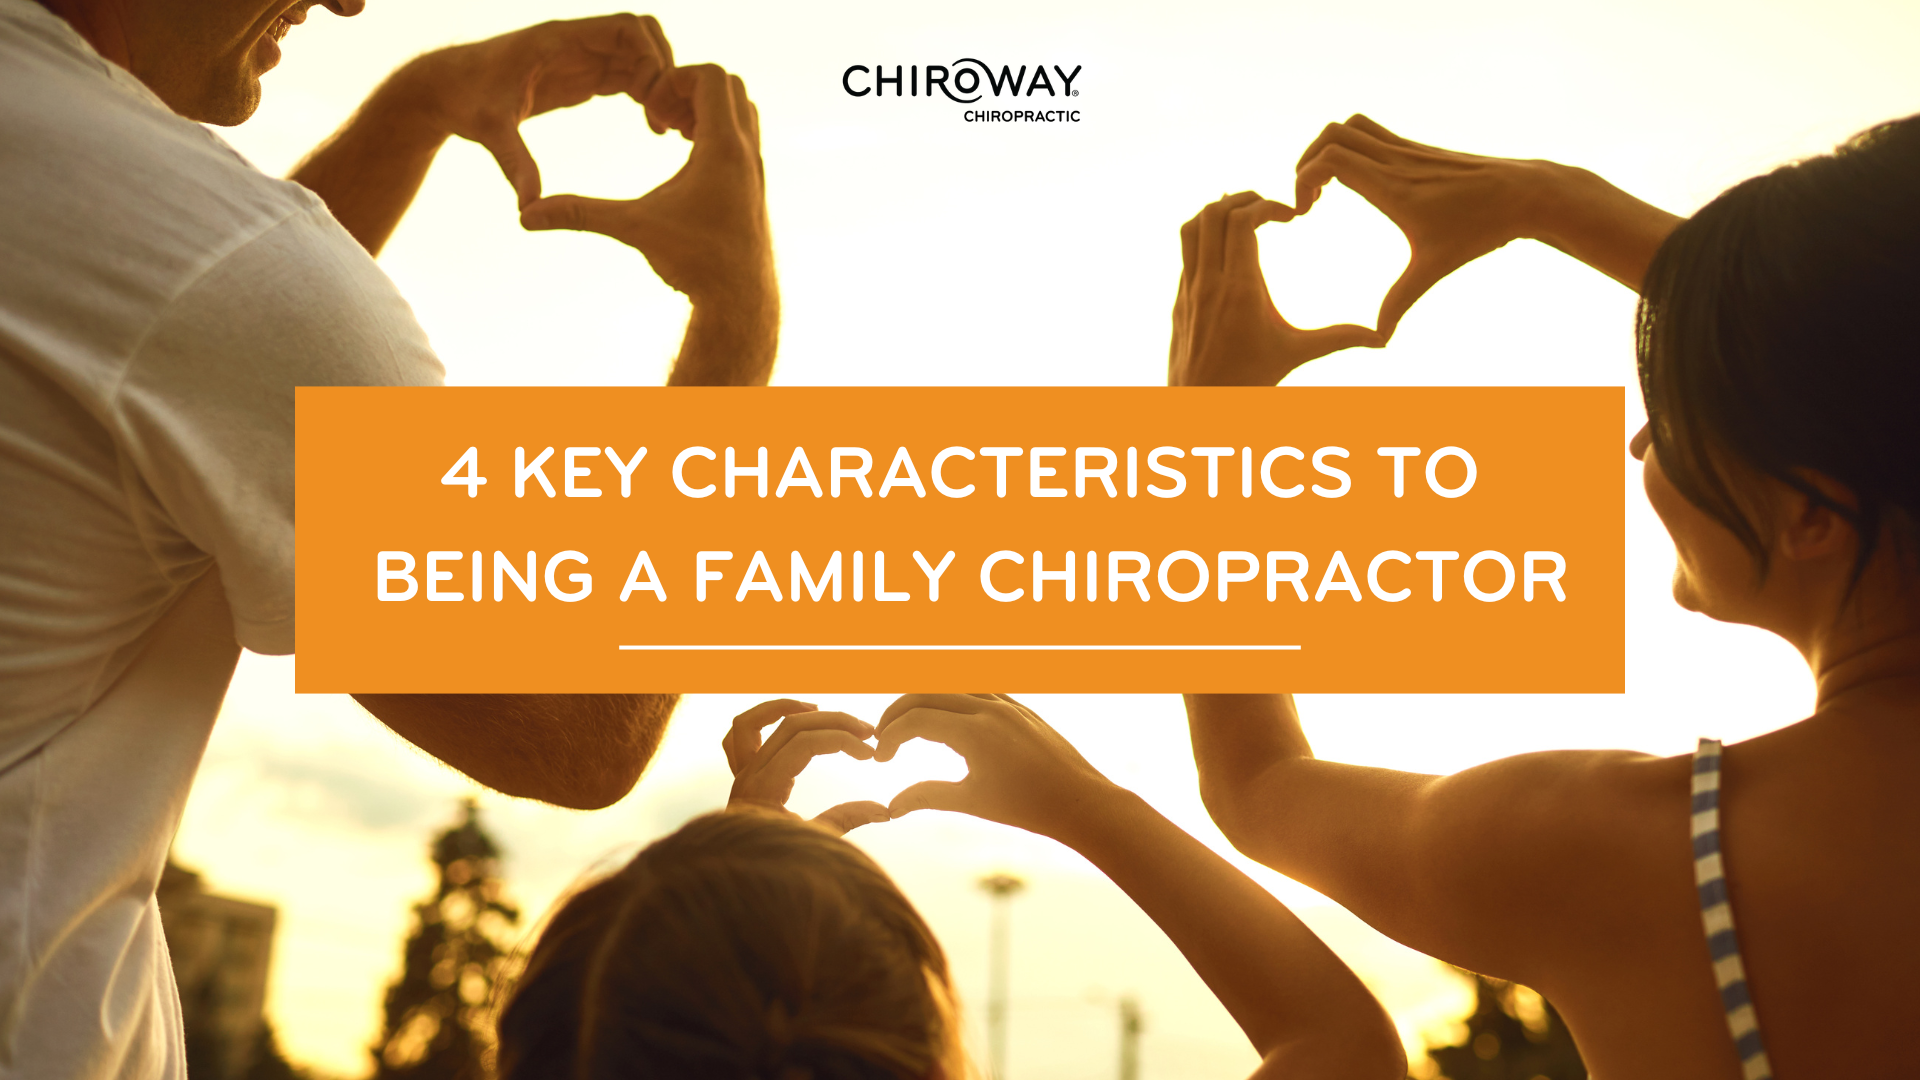 4 Key Characteristics to Being a Family Chiropractor